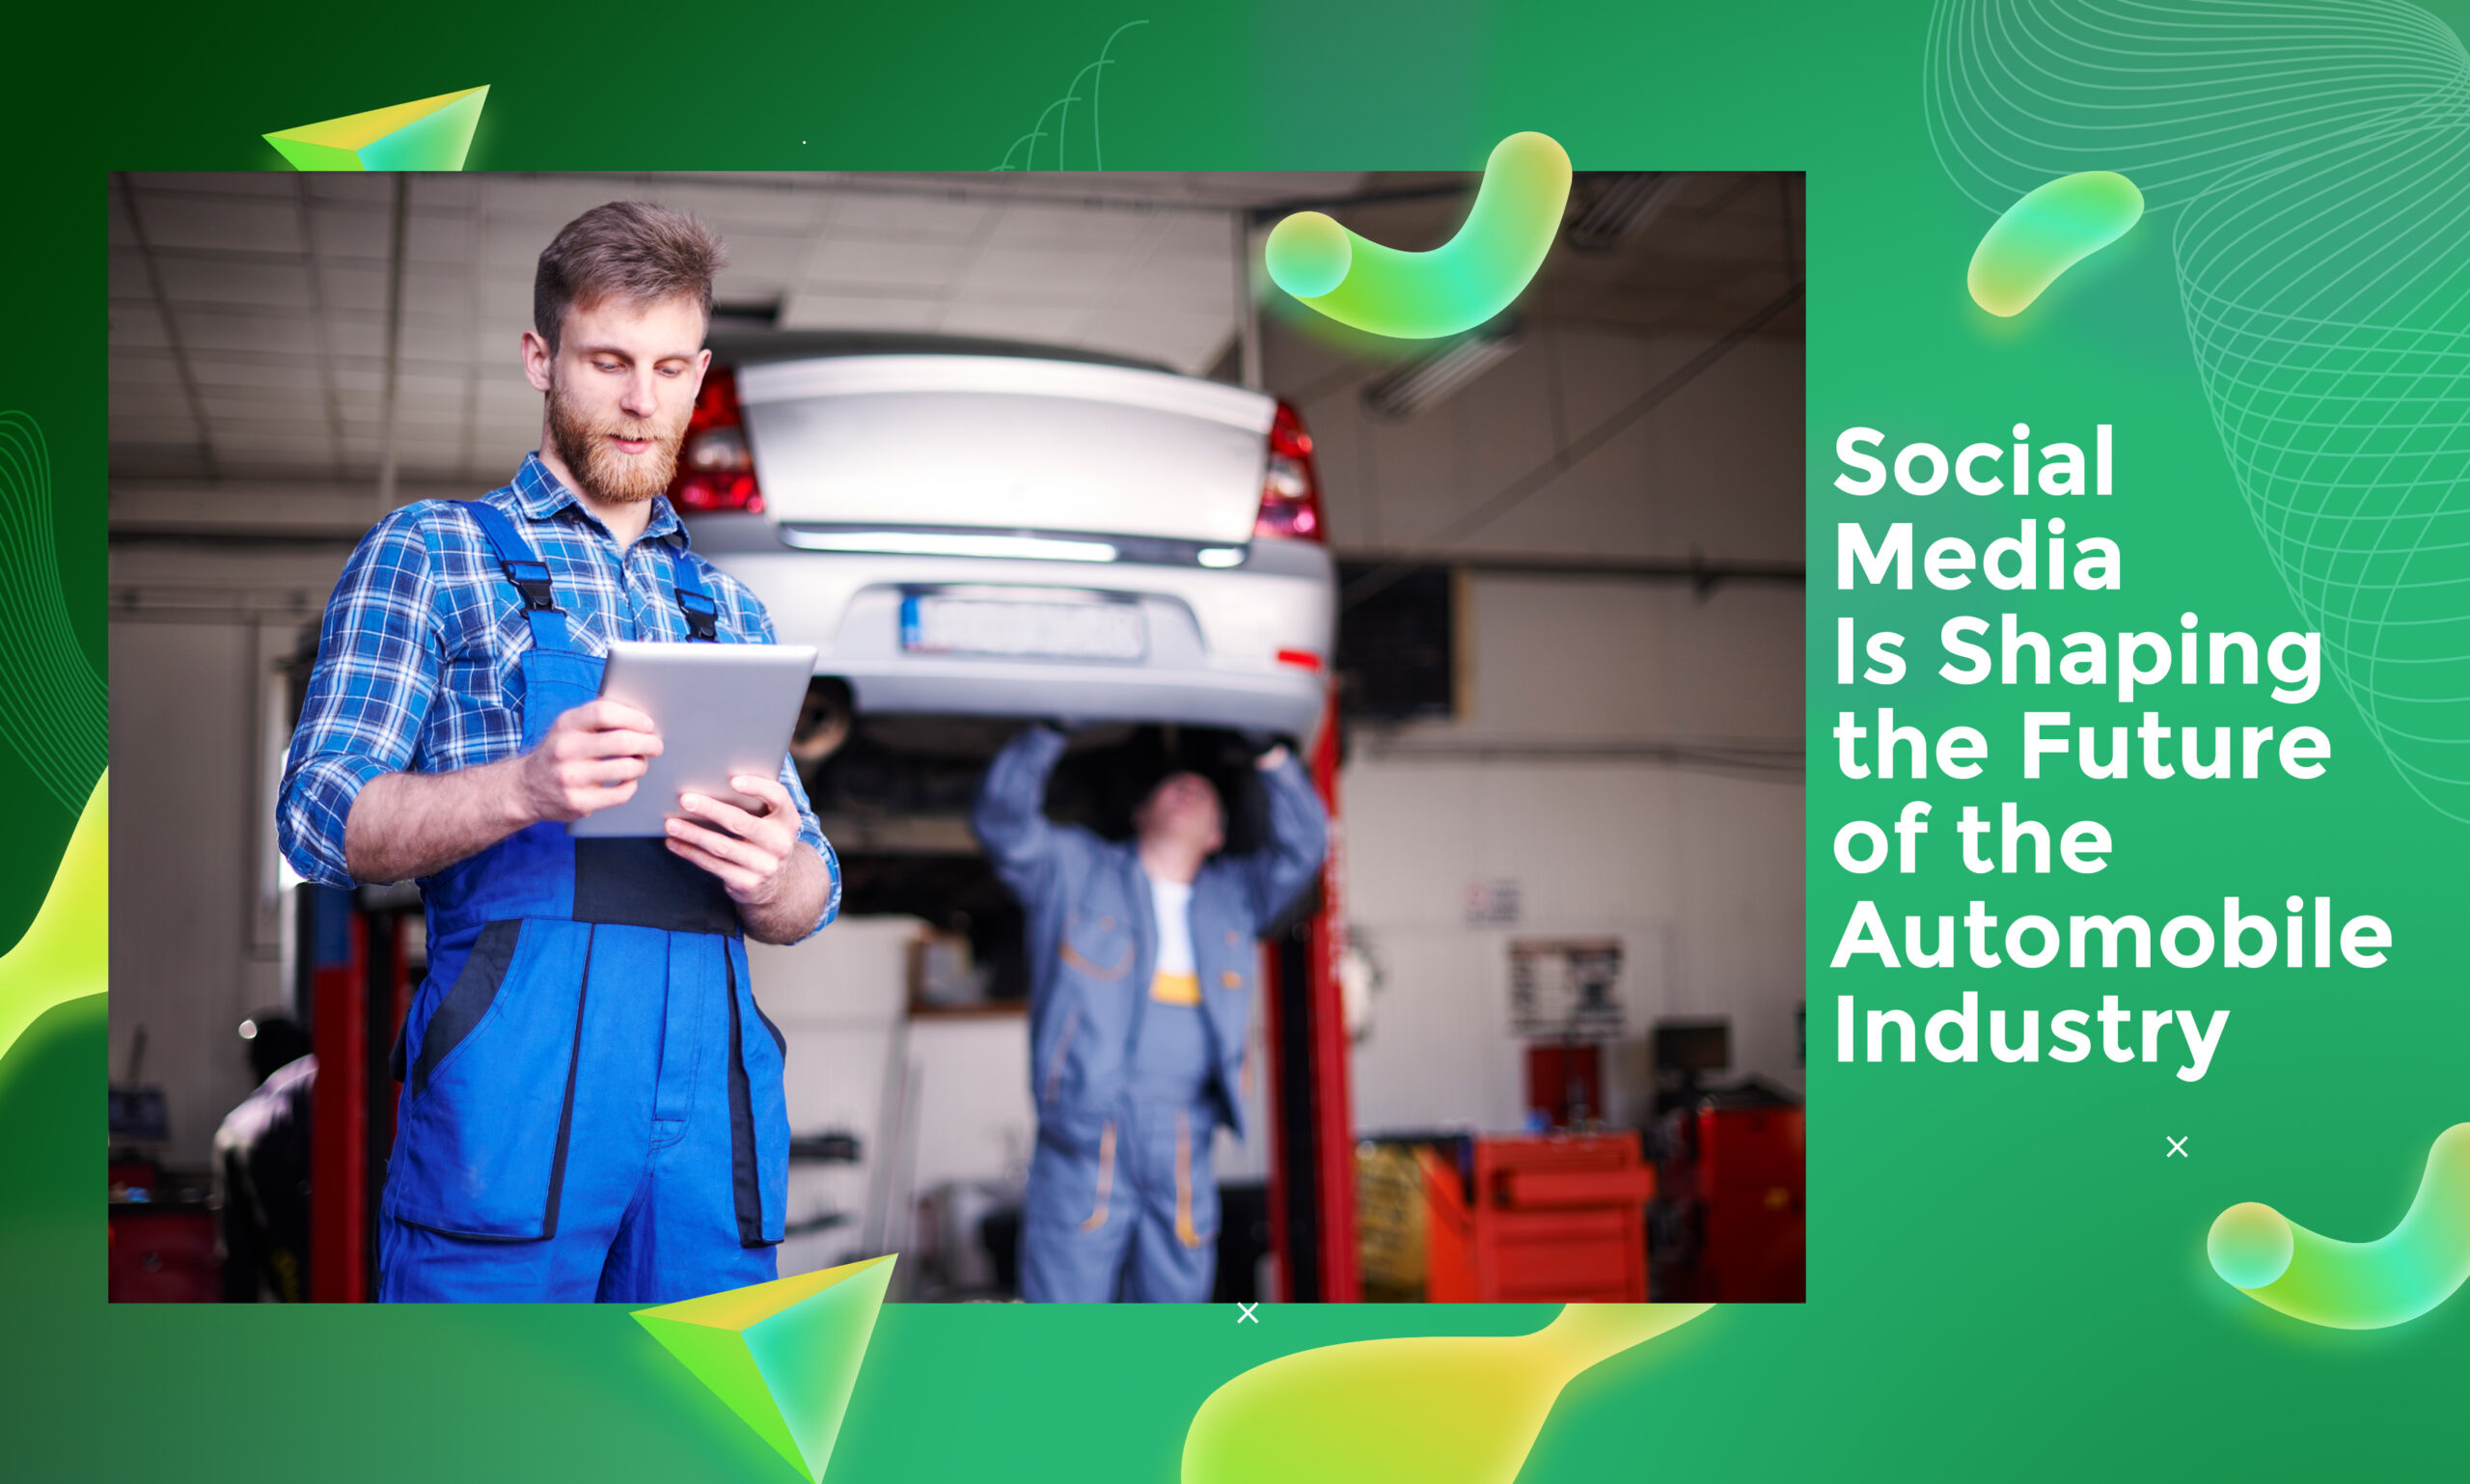 How Social Media Is Shaping the Future of the Automobile Industry?